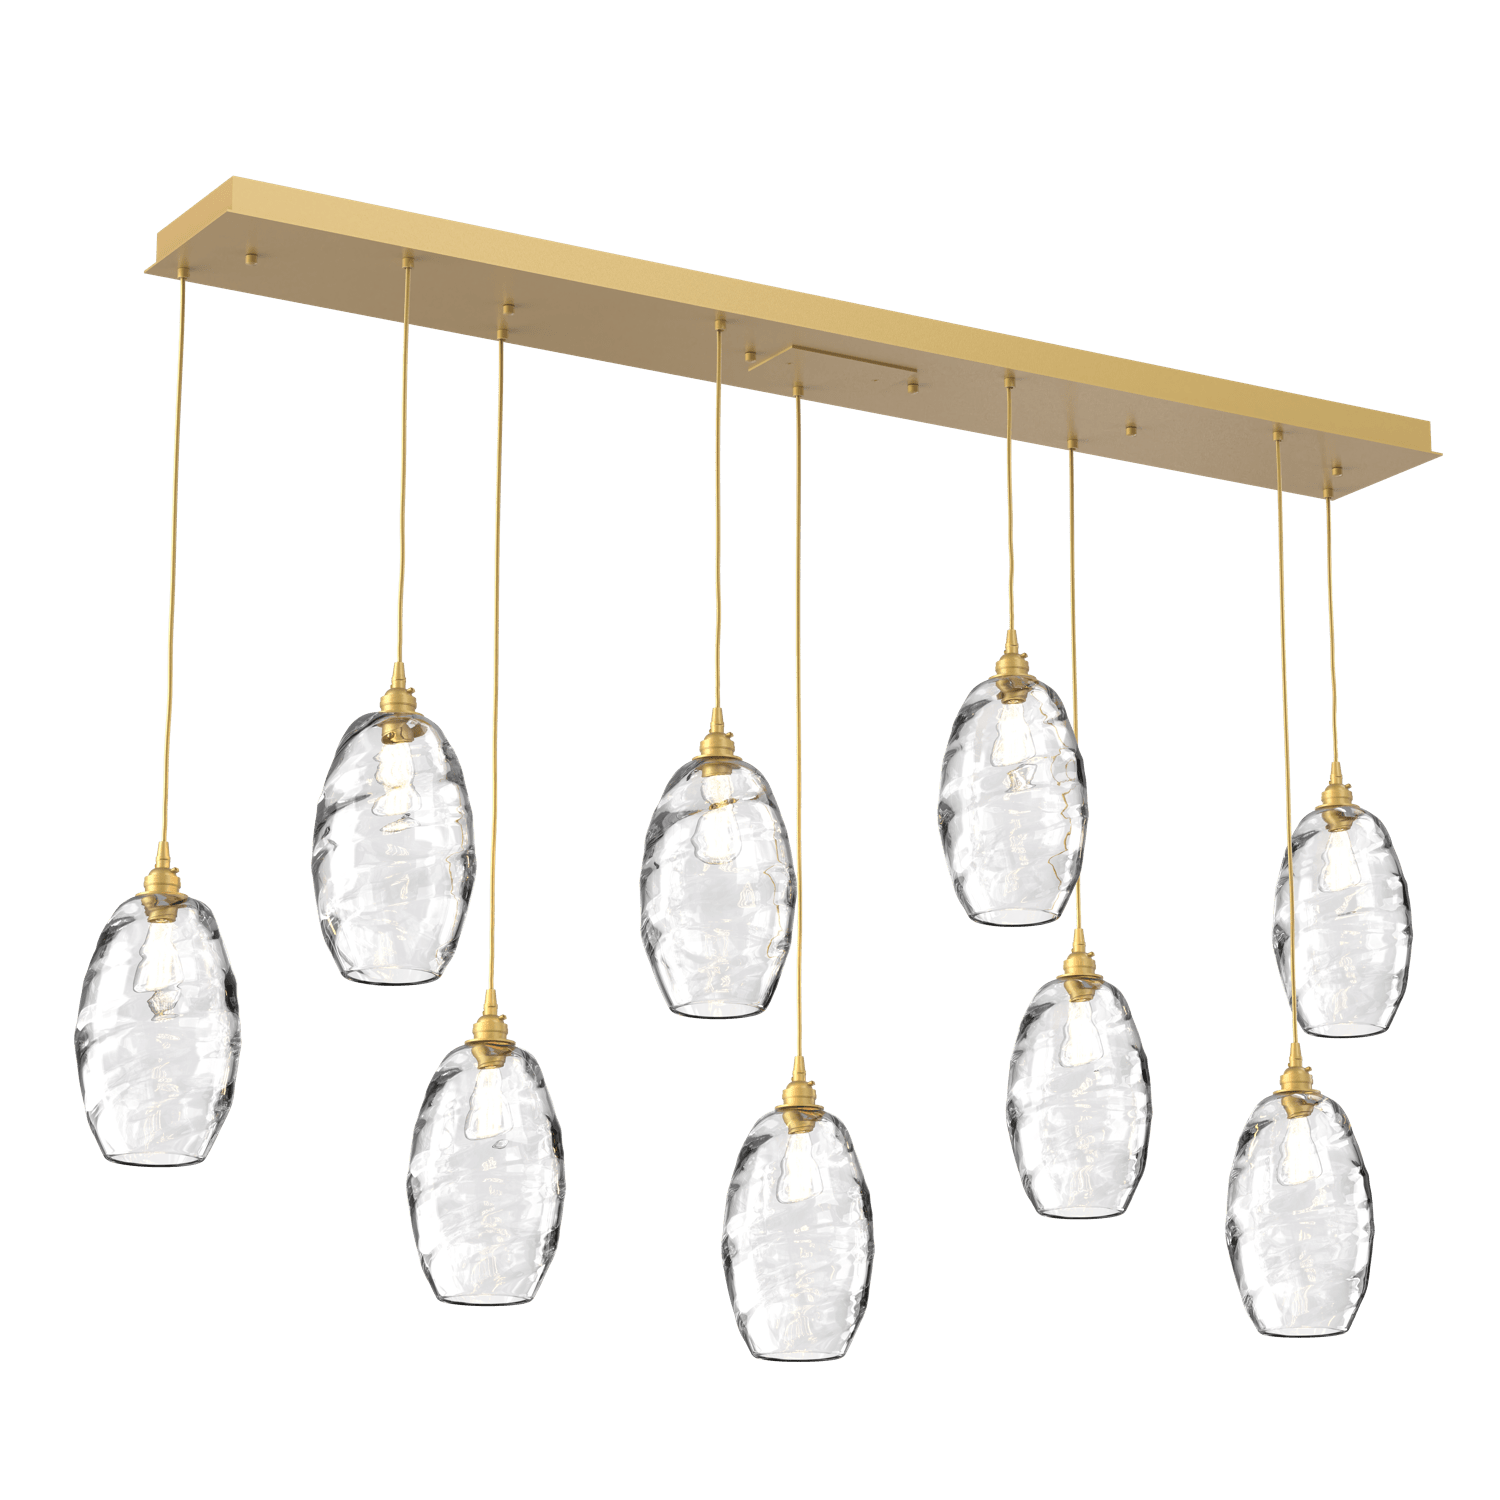 PLB0035-09-GB-OC-Hammerton-Studio-Optic-Blown-Glass-Elisse-9-light-linear-pendant-chandelier-with-gilded-brass-finish-and-optic-clear-blown-glass-shades-and-incandescent-lamping